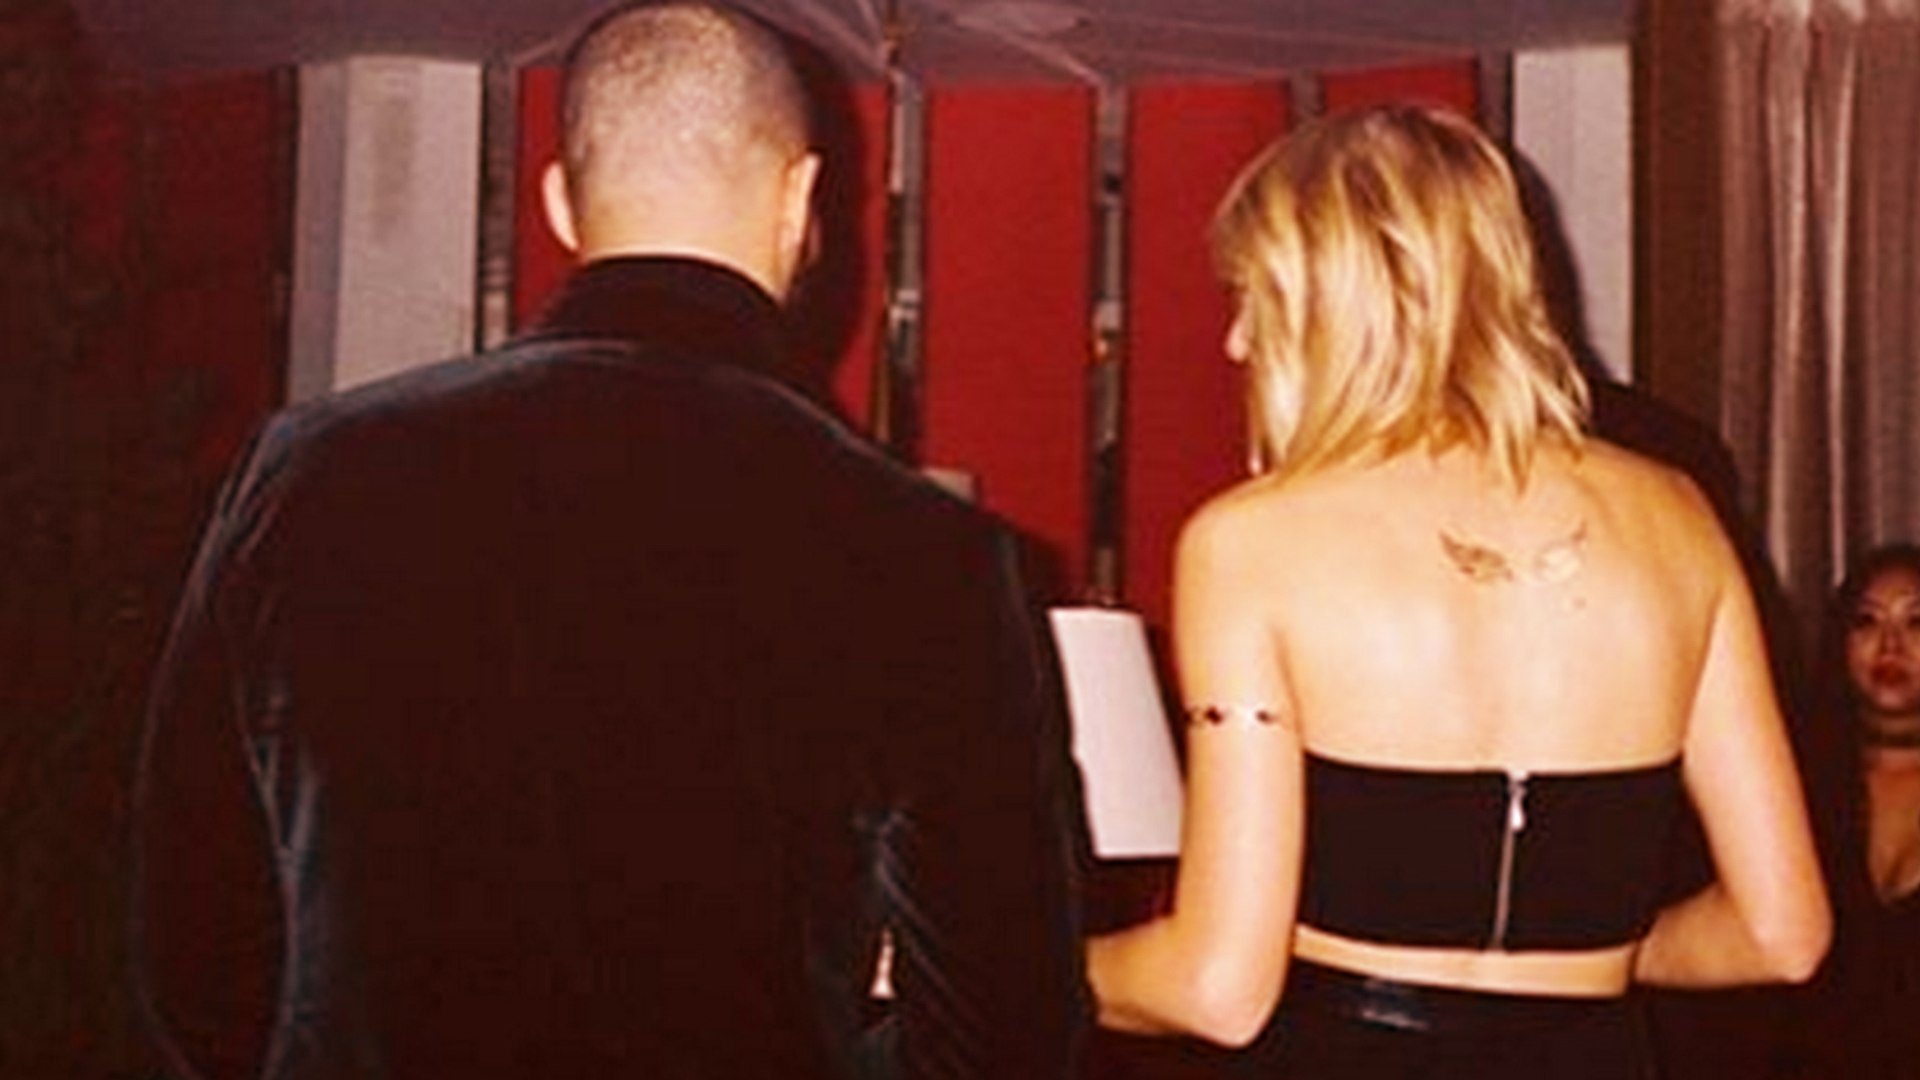 Drake Instagram Pic with Taylor Swift Adds Fuels to Romance Rumors